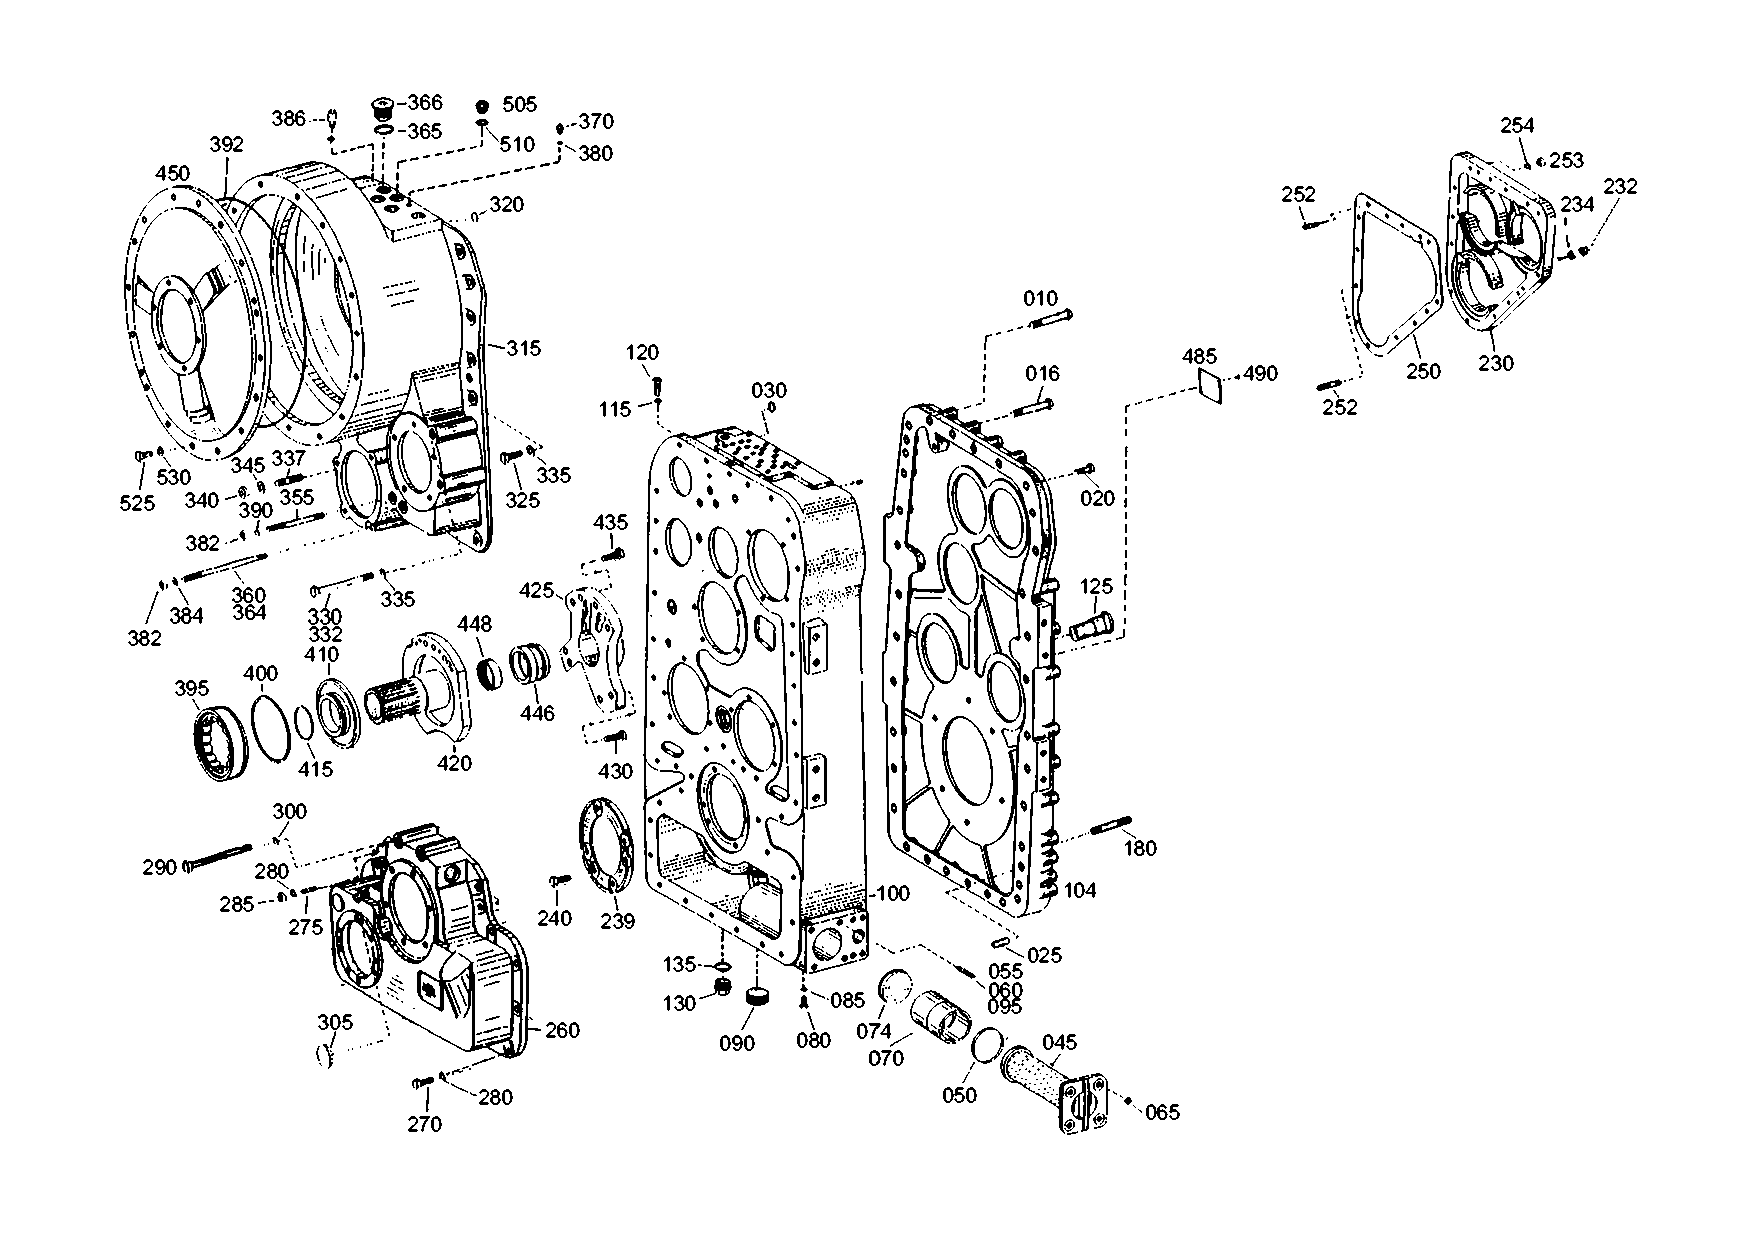 drawing for NACCO-IRV 0382715 - SPRING WASHER